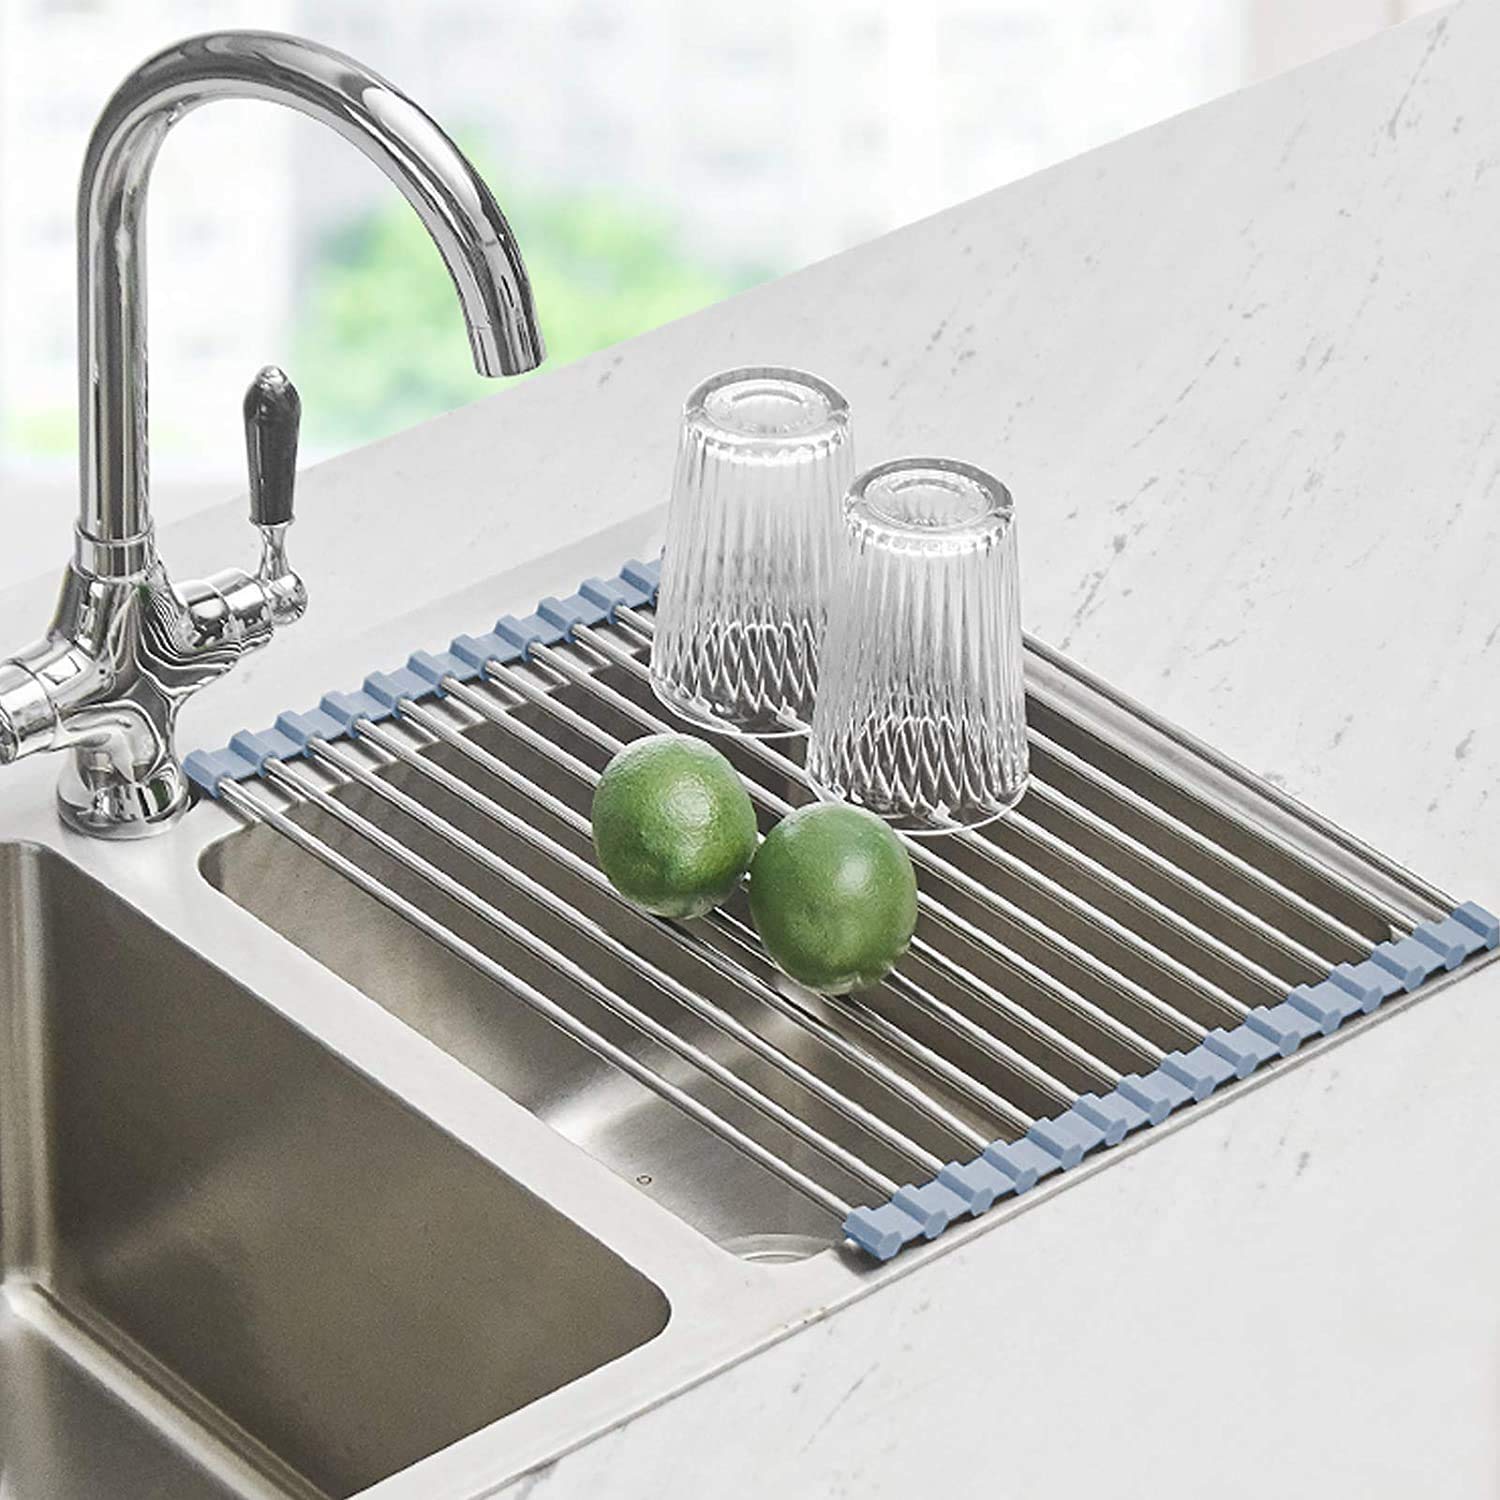 17.5" x 11.8" Seropy Over-The-Sink Roll Up Dish Drying Rack $6.82 + Free Shipping w/ Prime or on orders $35+